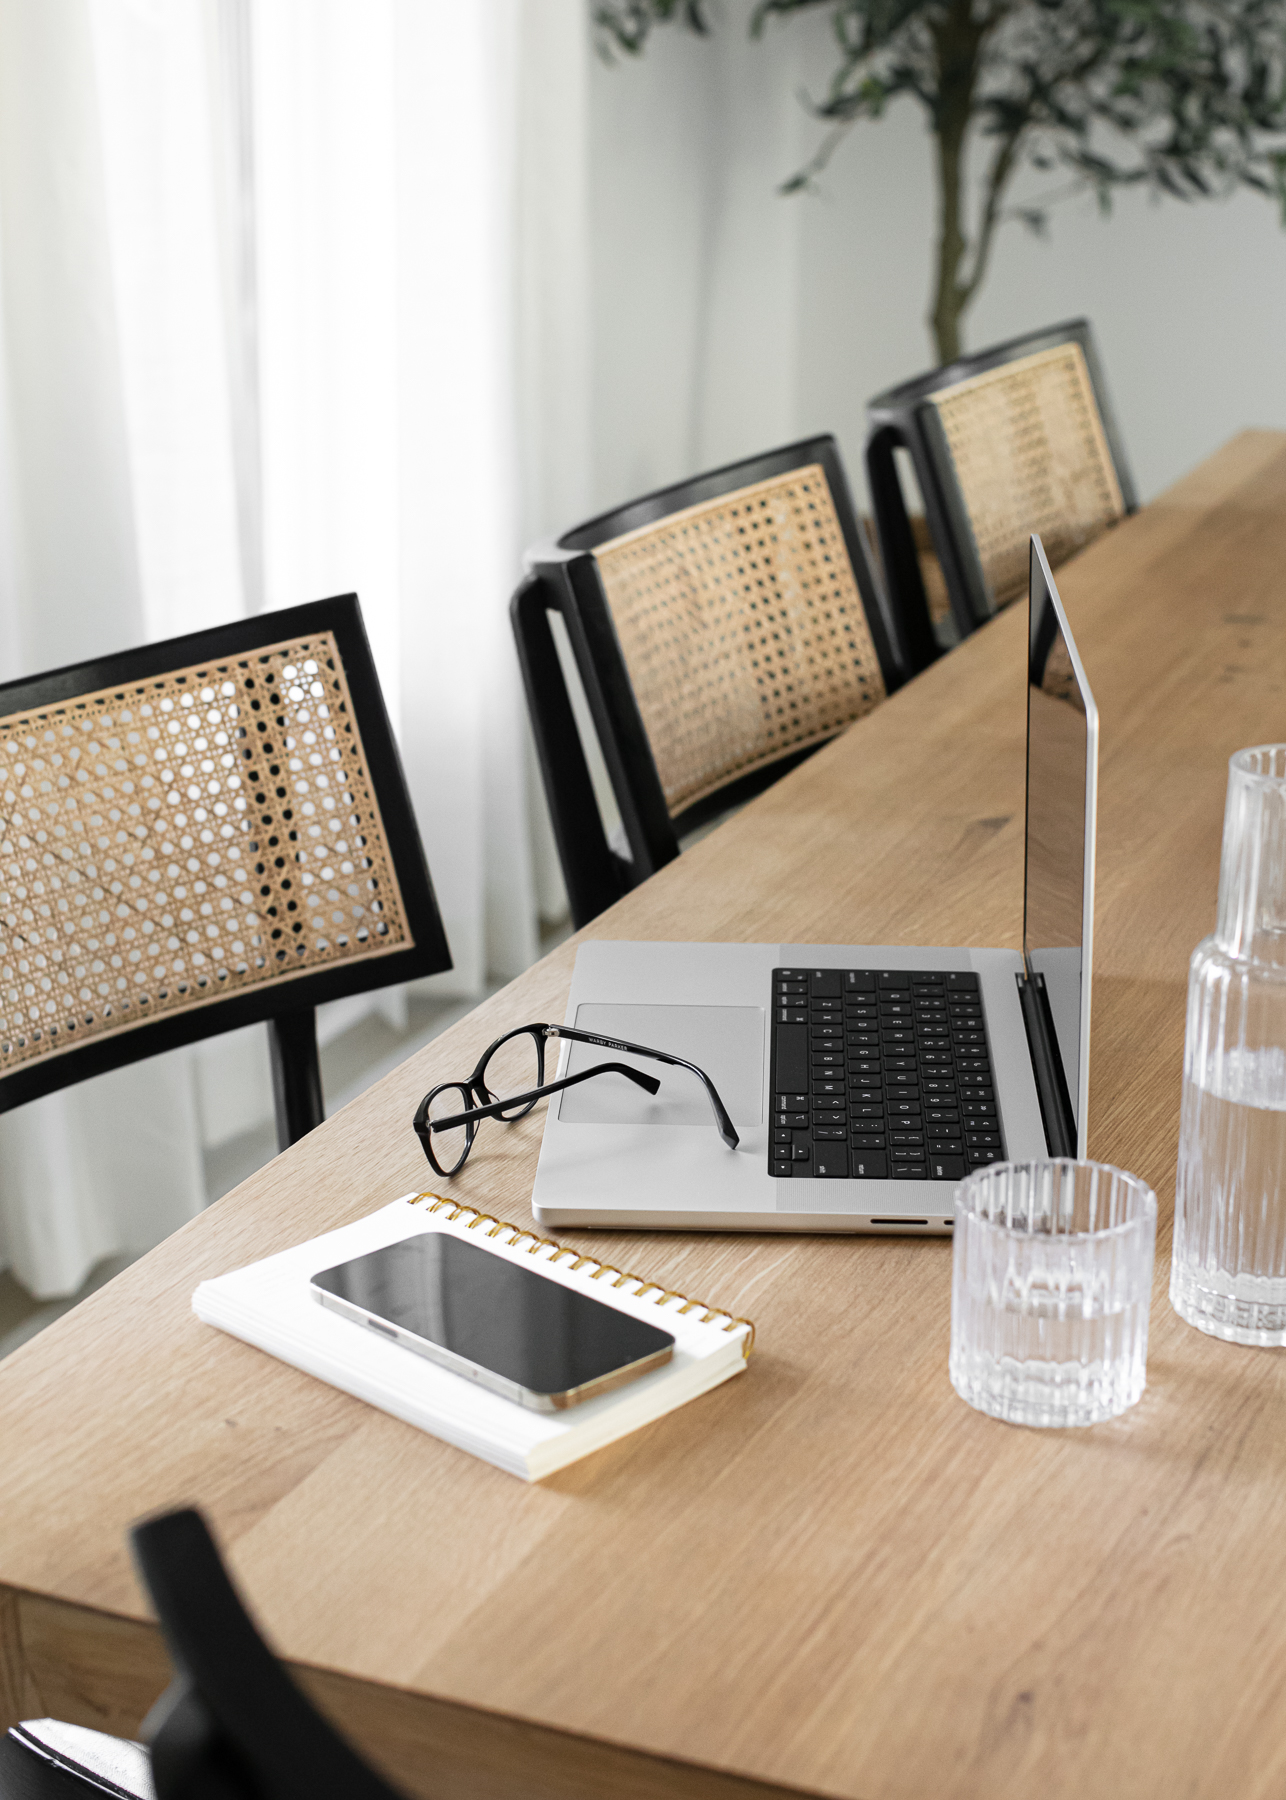 photo of interior designer's work area with laptop, glasses, iphone, and a glass of water with pretty black and cane chairs in the background